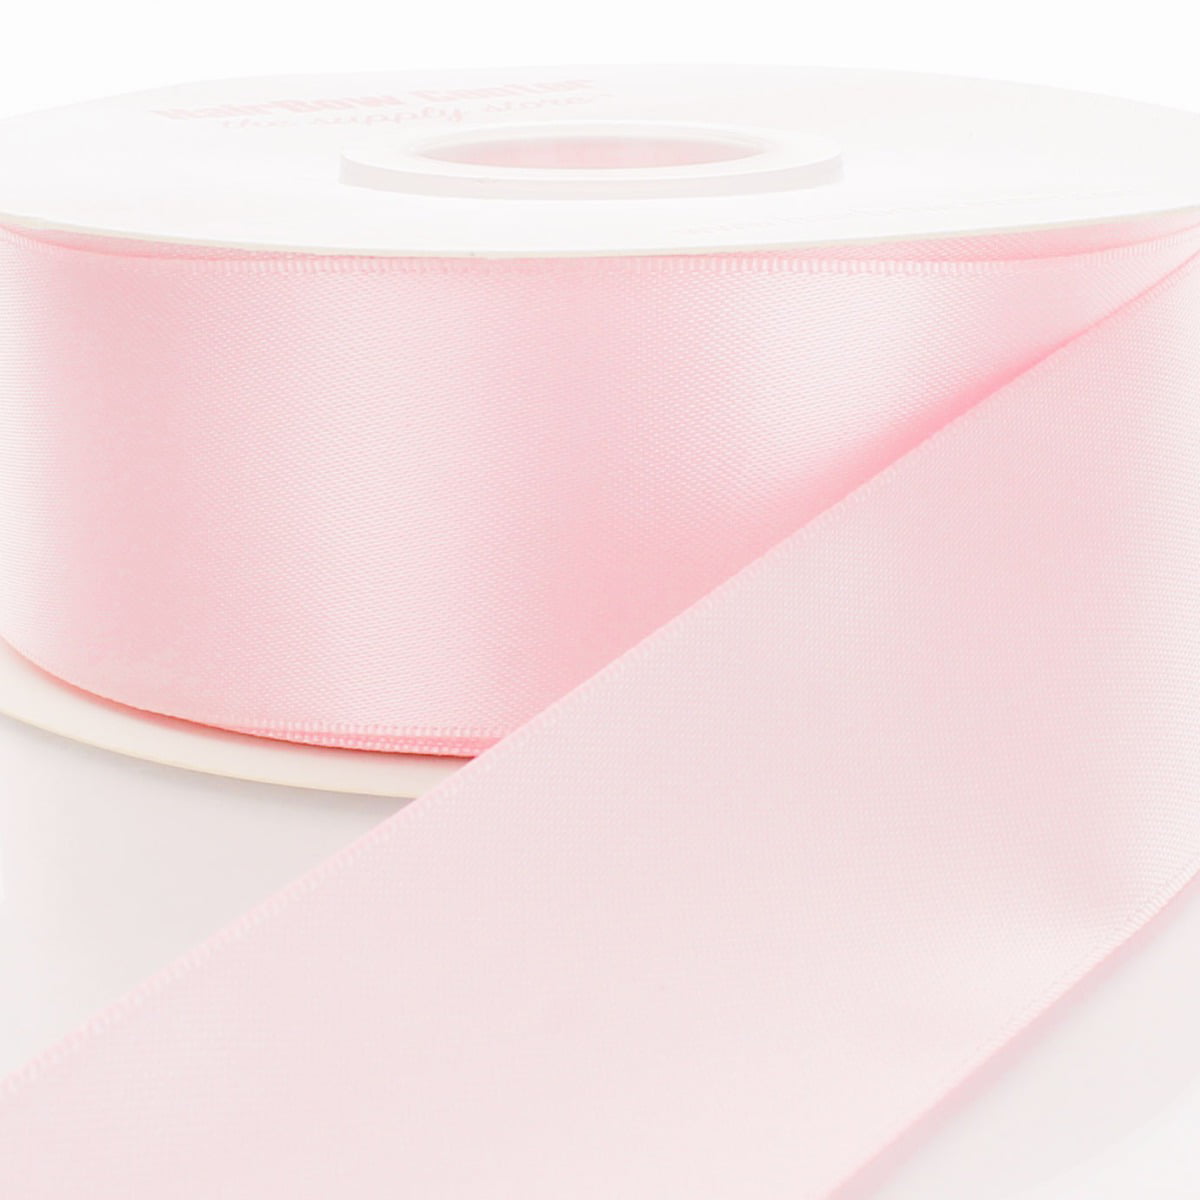 Satin Ribbon 1/2 Inch 15 Mm Wide Double Sided Satin Ribbon Sold by